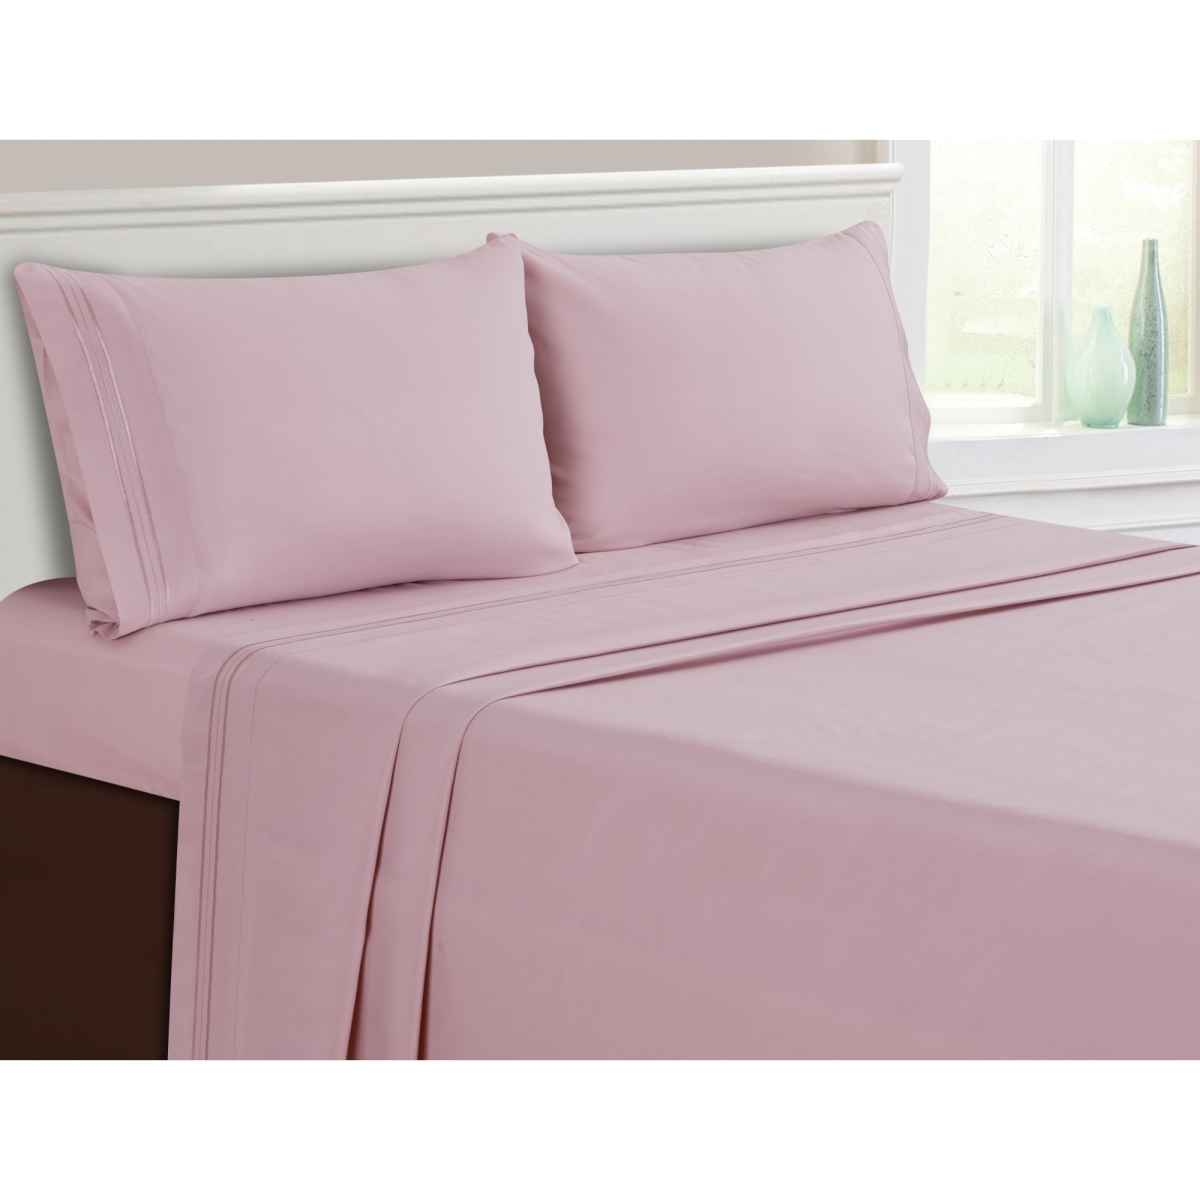 Whtx607-bhq 3-line Embroidered Blush Polyester Sheet Set - Queen Size - 4 Piece